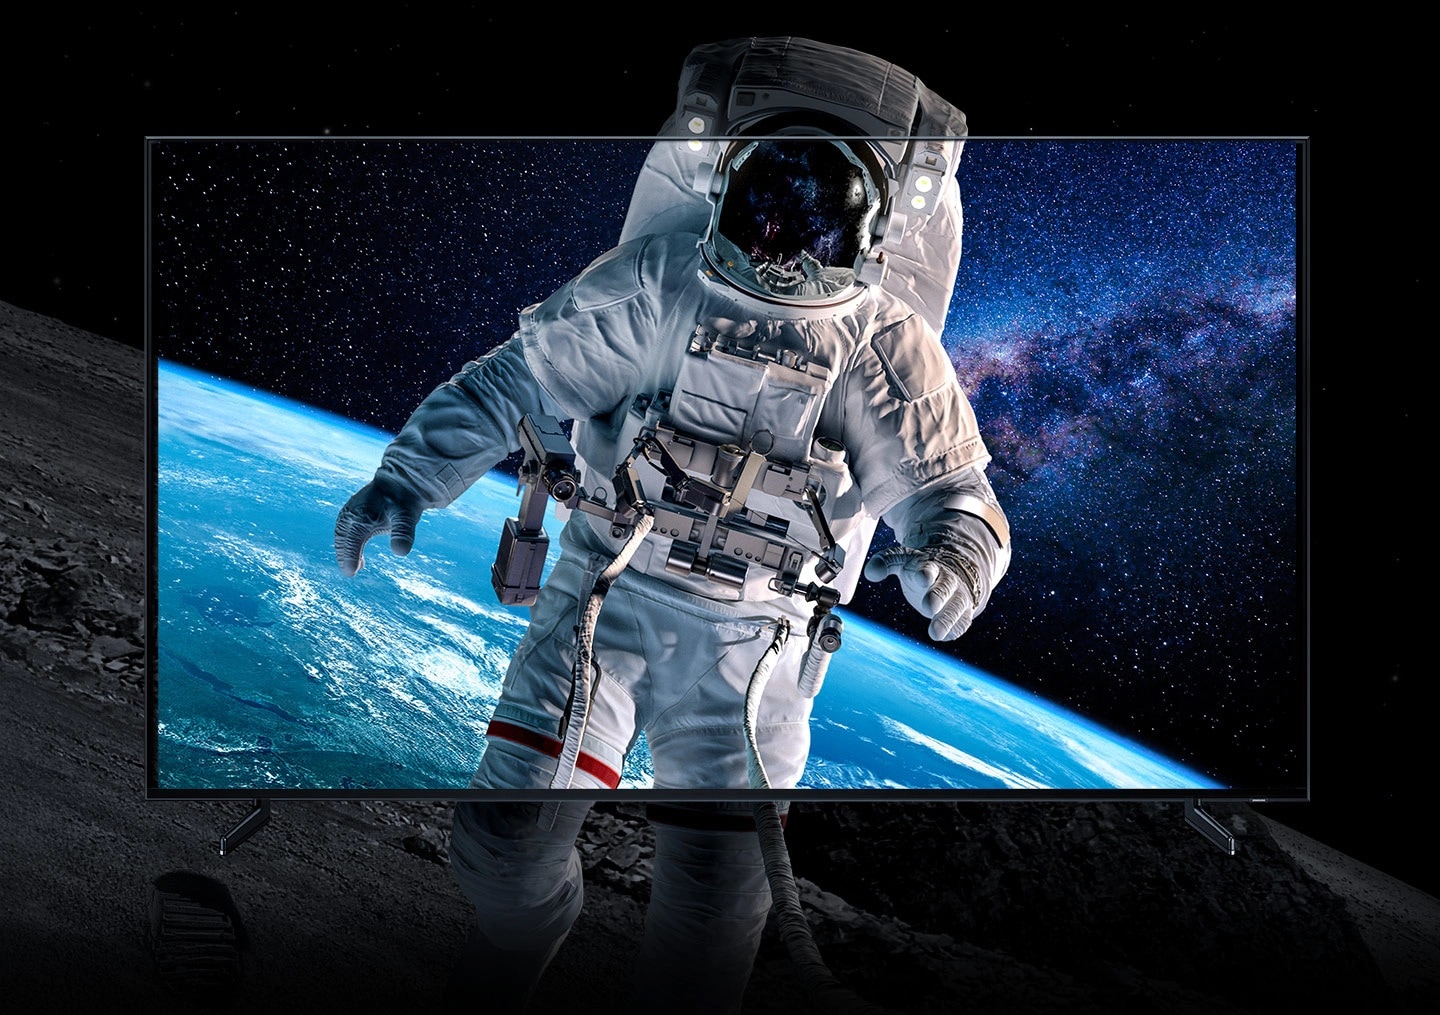 Closeup shot of an astronaut in space, displayed in full color within a QLED 8K screen, as the image bleeds out outside of the screen to demonstrate how realistic the images appear with 8K definition. 